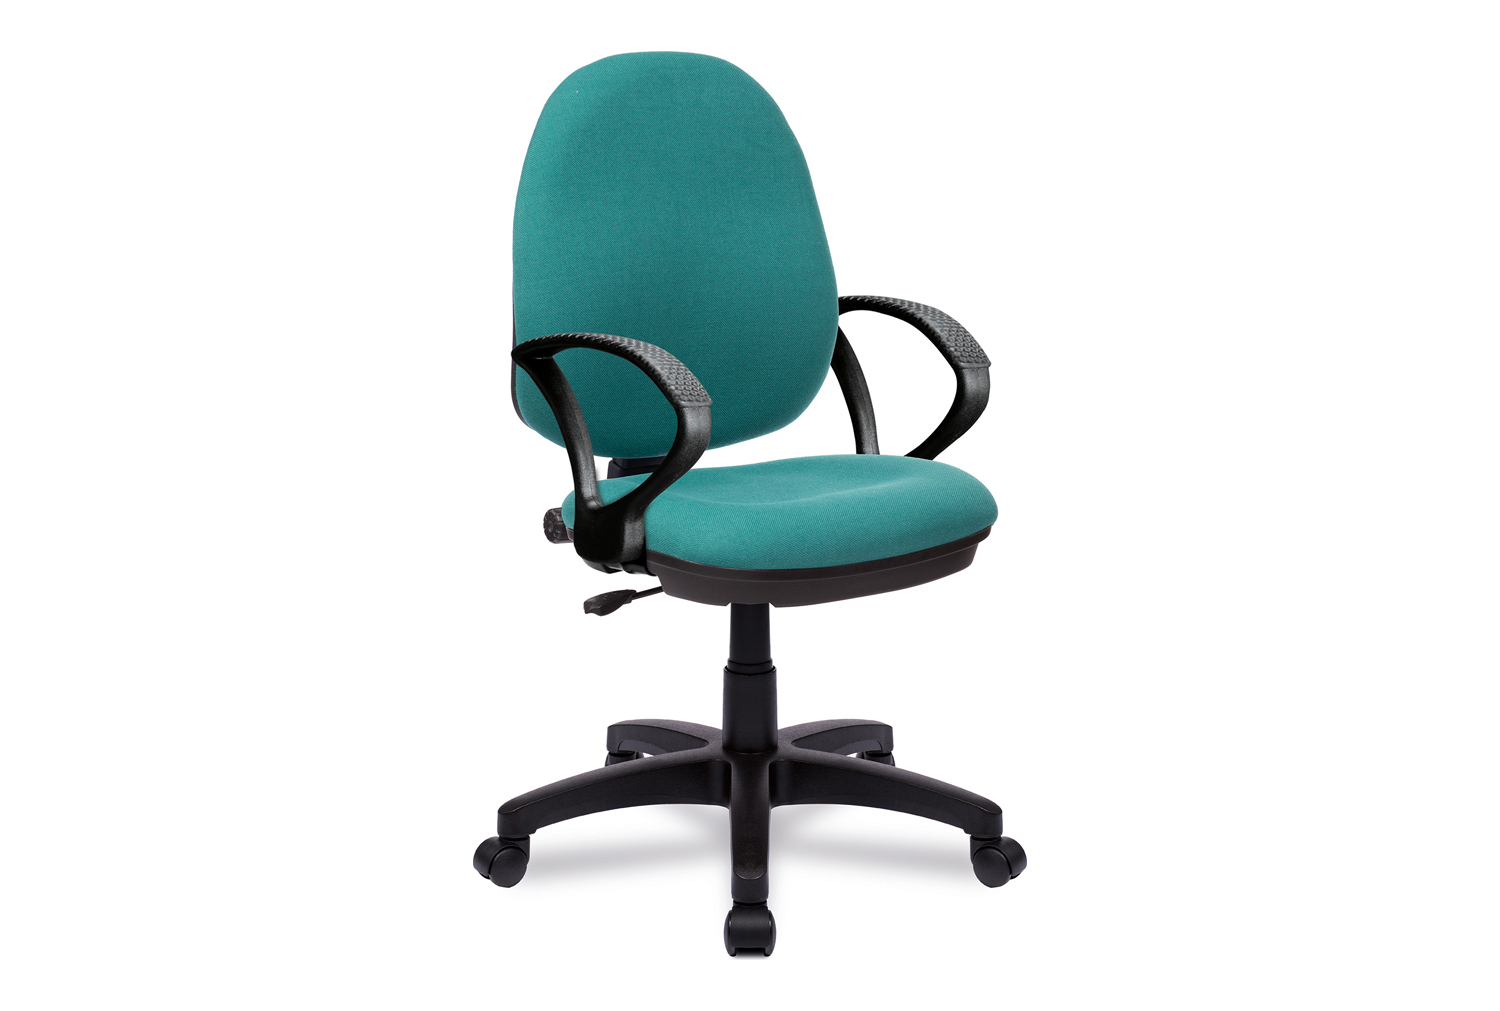 Mineo 1 Lever Operator Office Chair With Fixed Arms, Green, Fully Installed